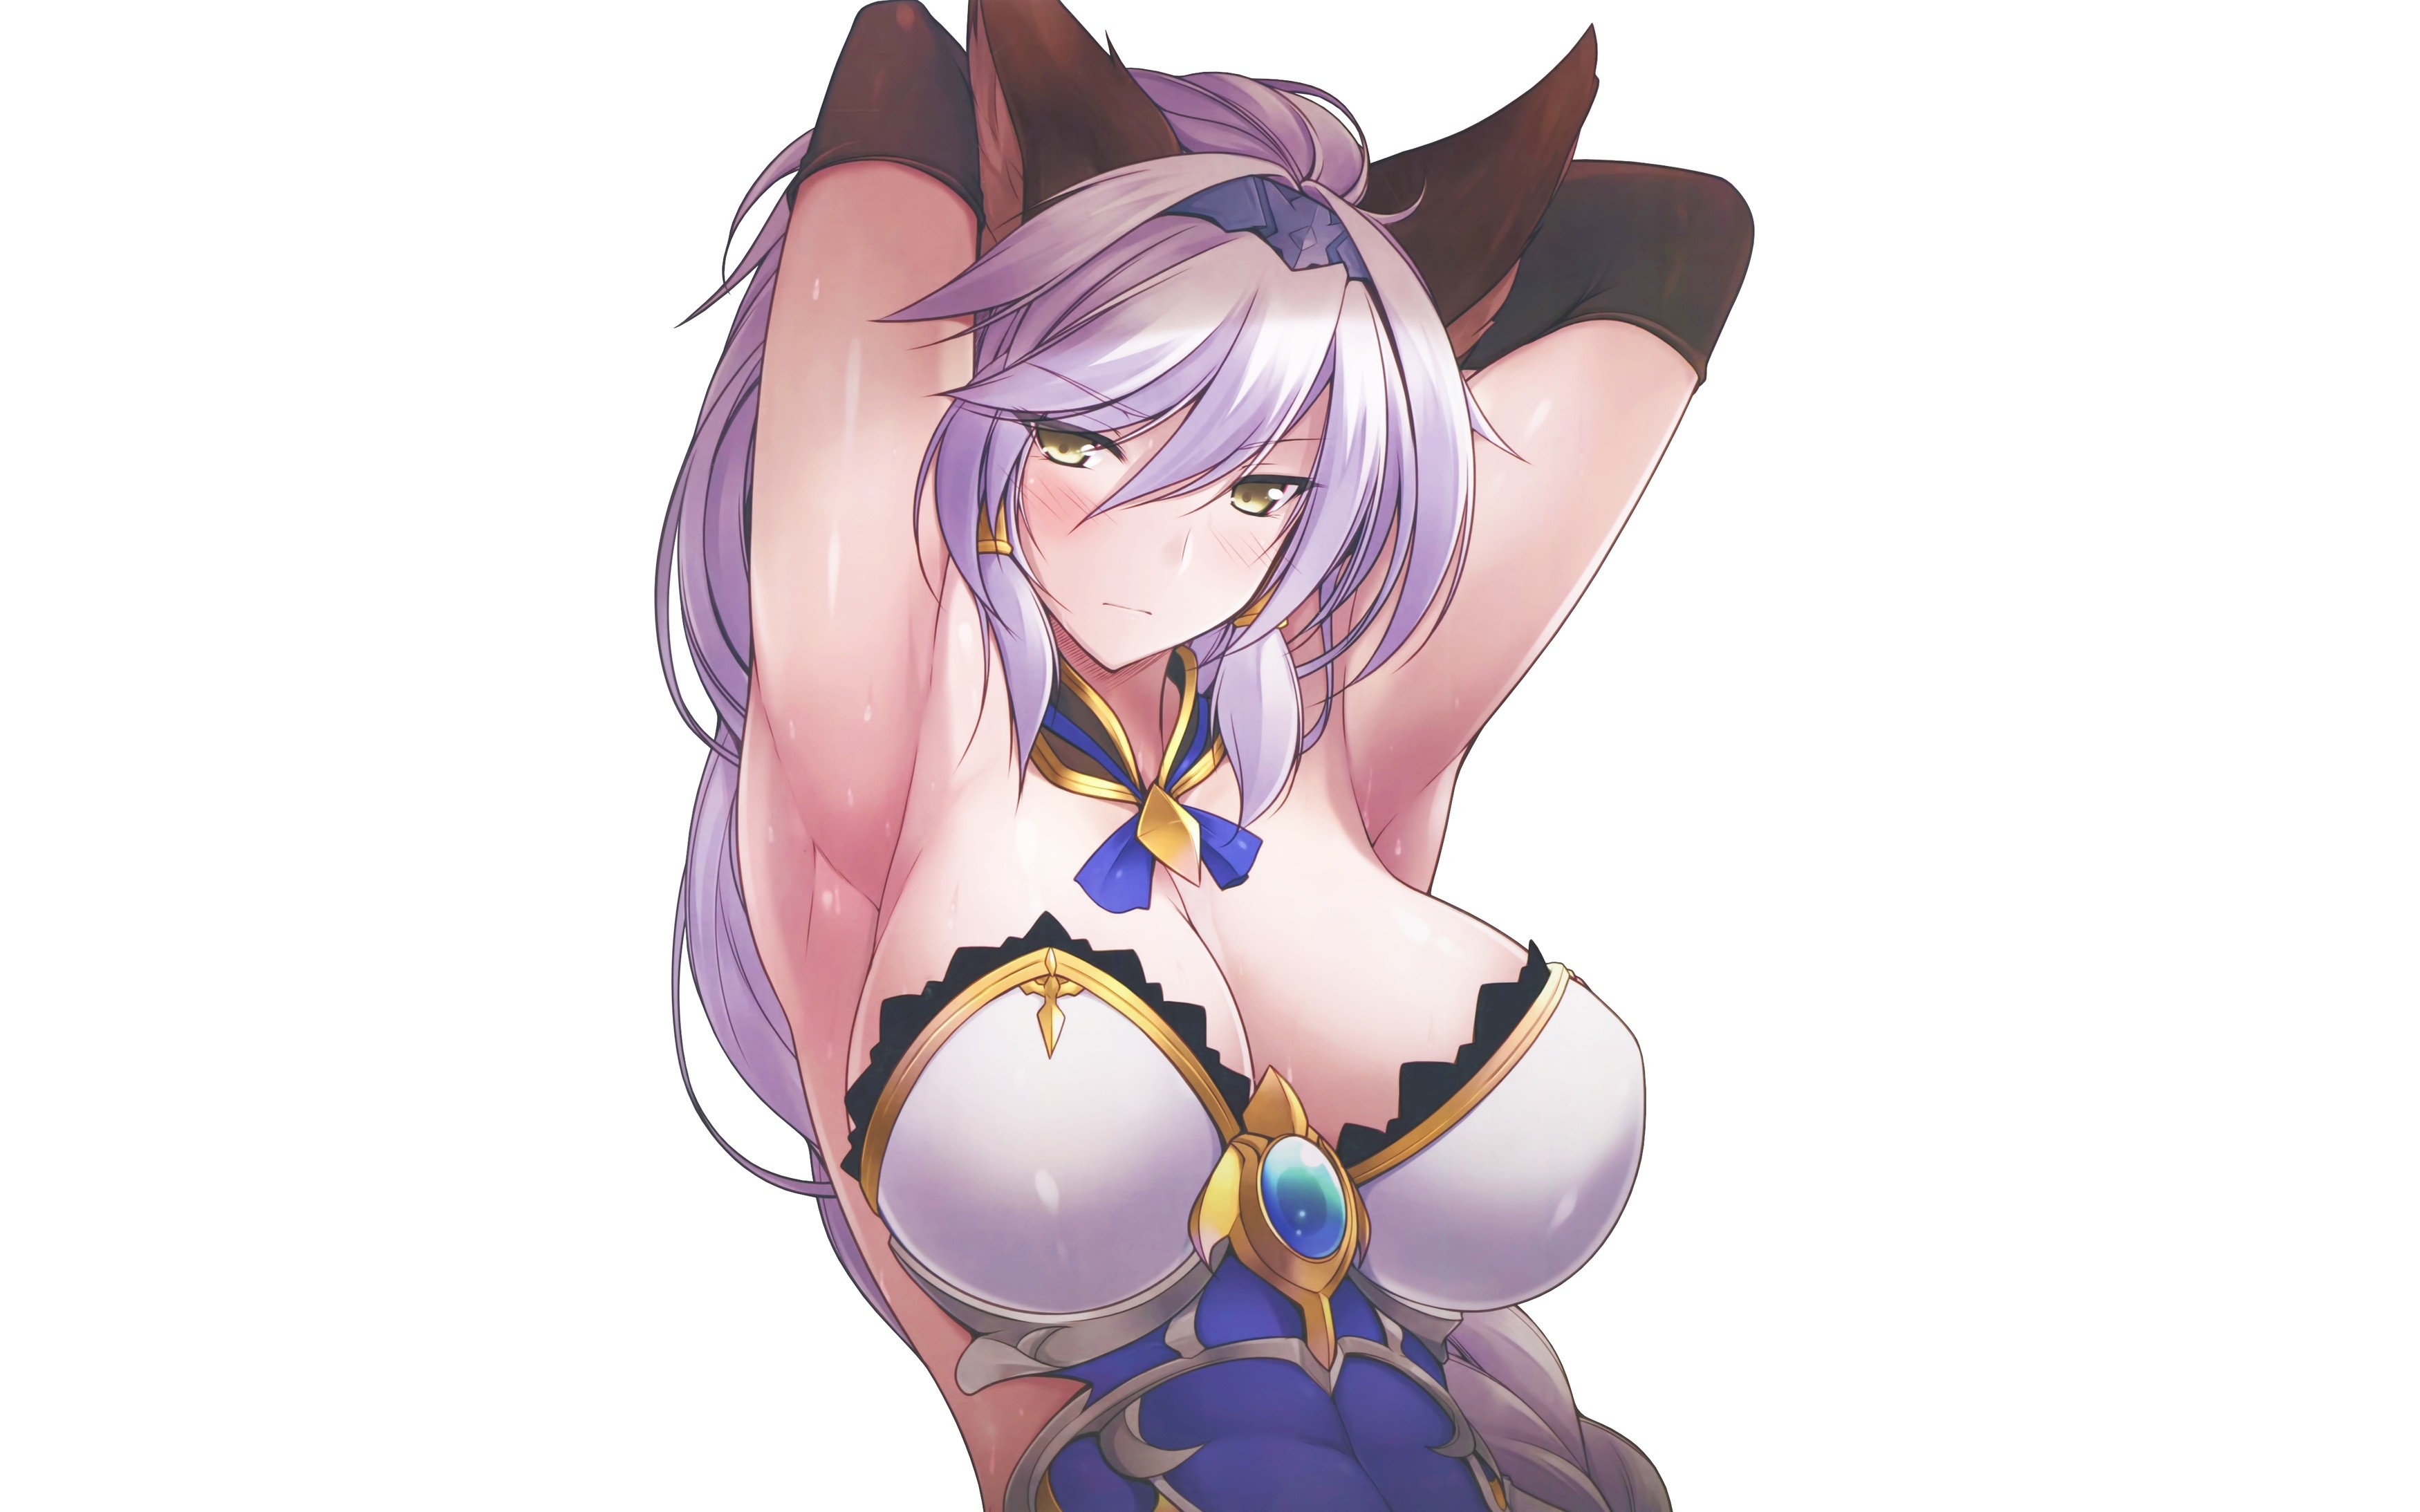 Anime 3500x2187 anime anime girls Granblue Fantasy animal ears armor long hair purple hair boobs big boobs huge breasts curvy arms up white background women simple background fantasy art fantasy girl looking at viewer